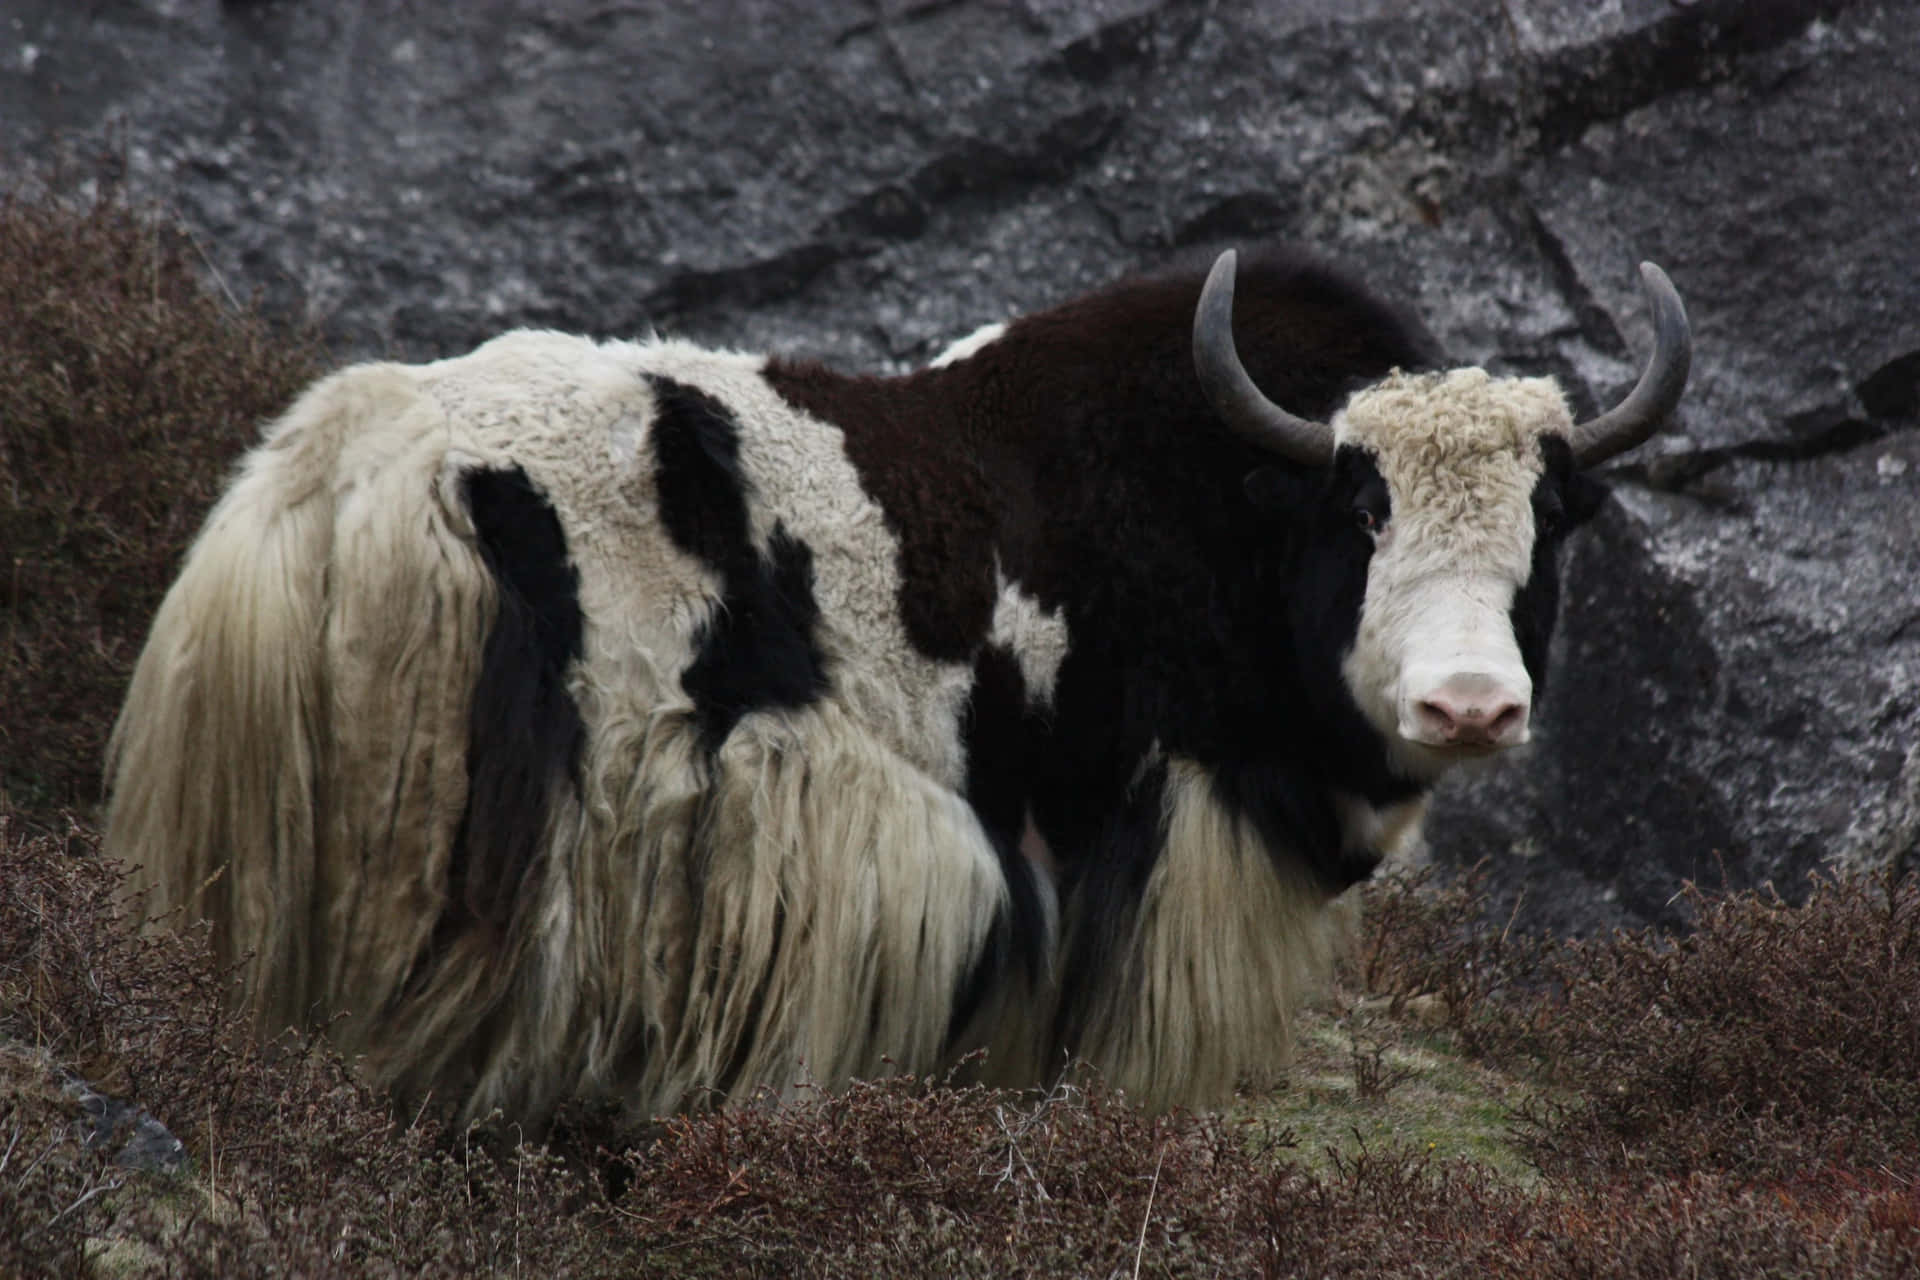 A shaggy, warm-colored yak stares out from the snow-covered mountain side.